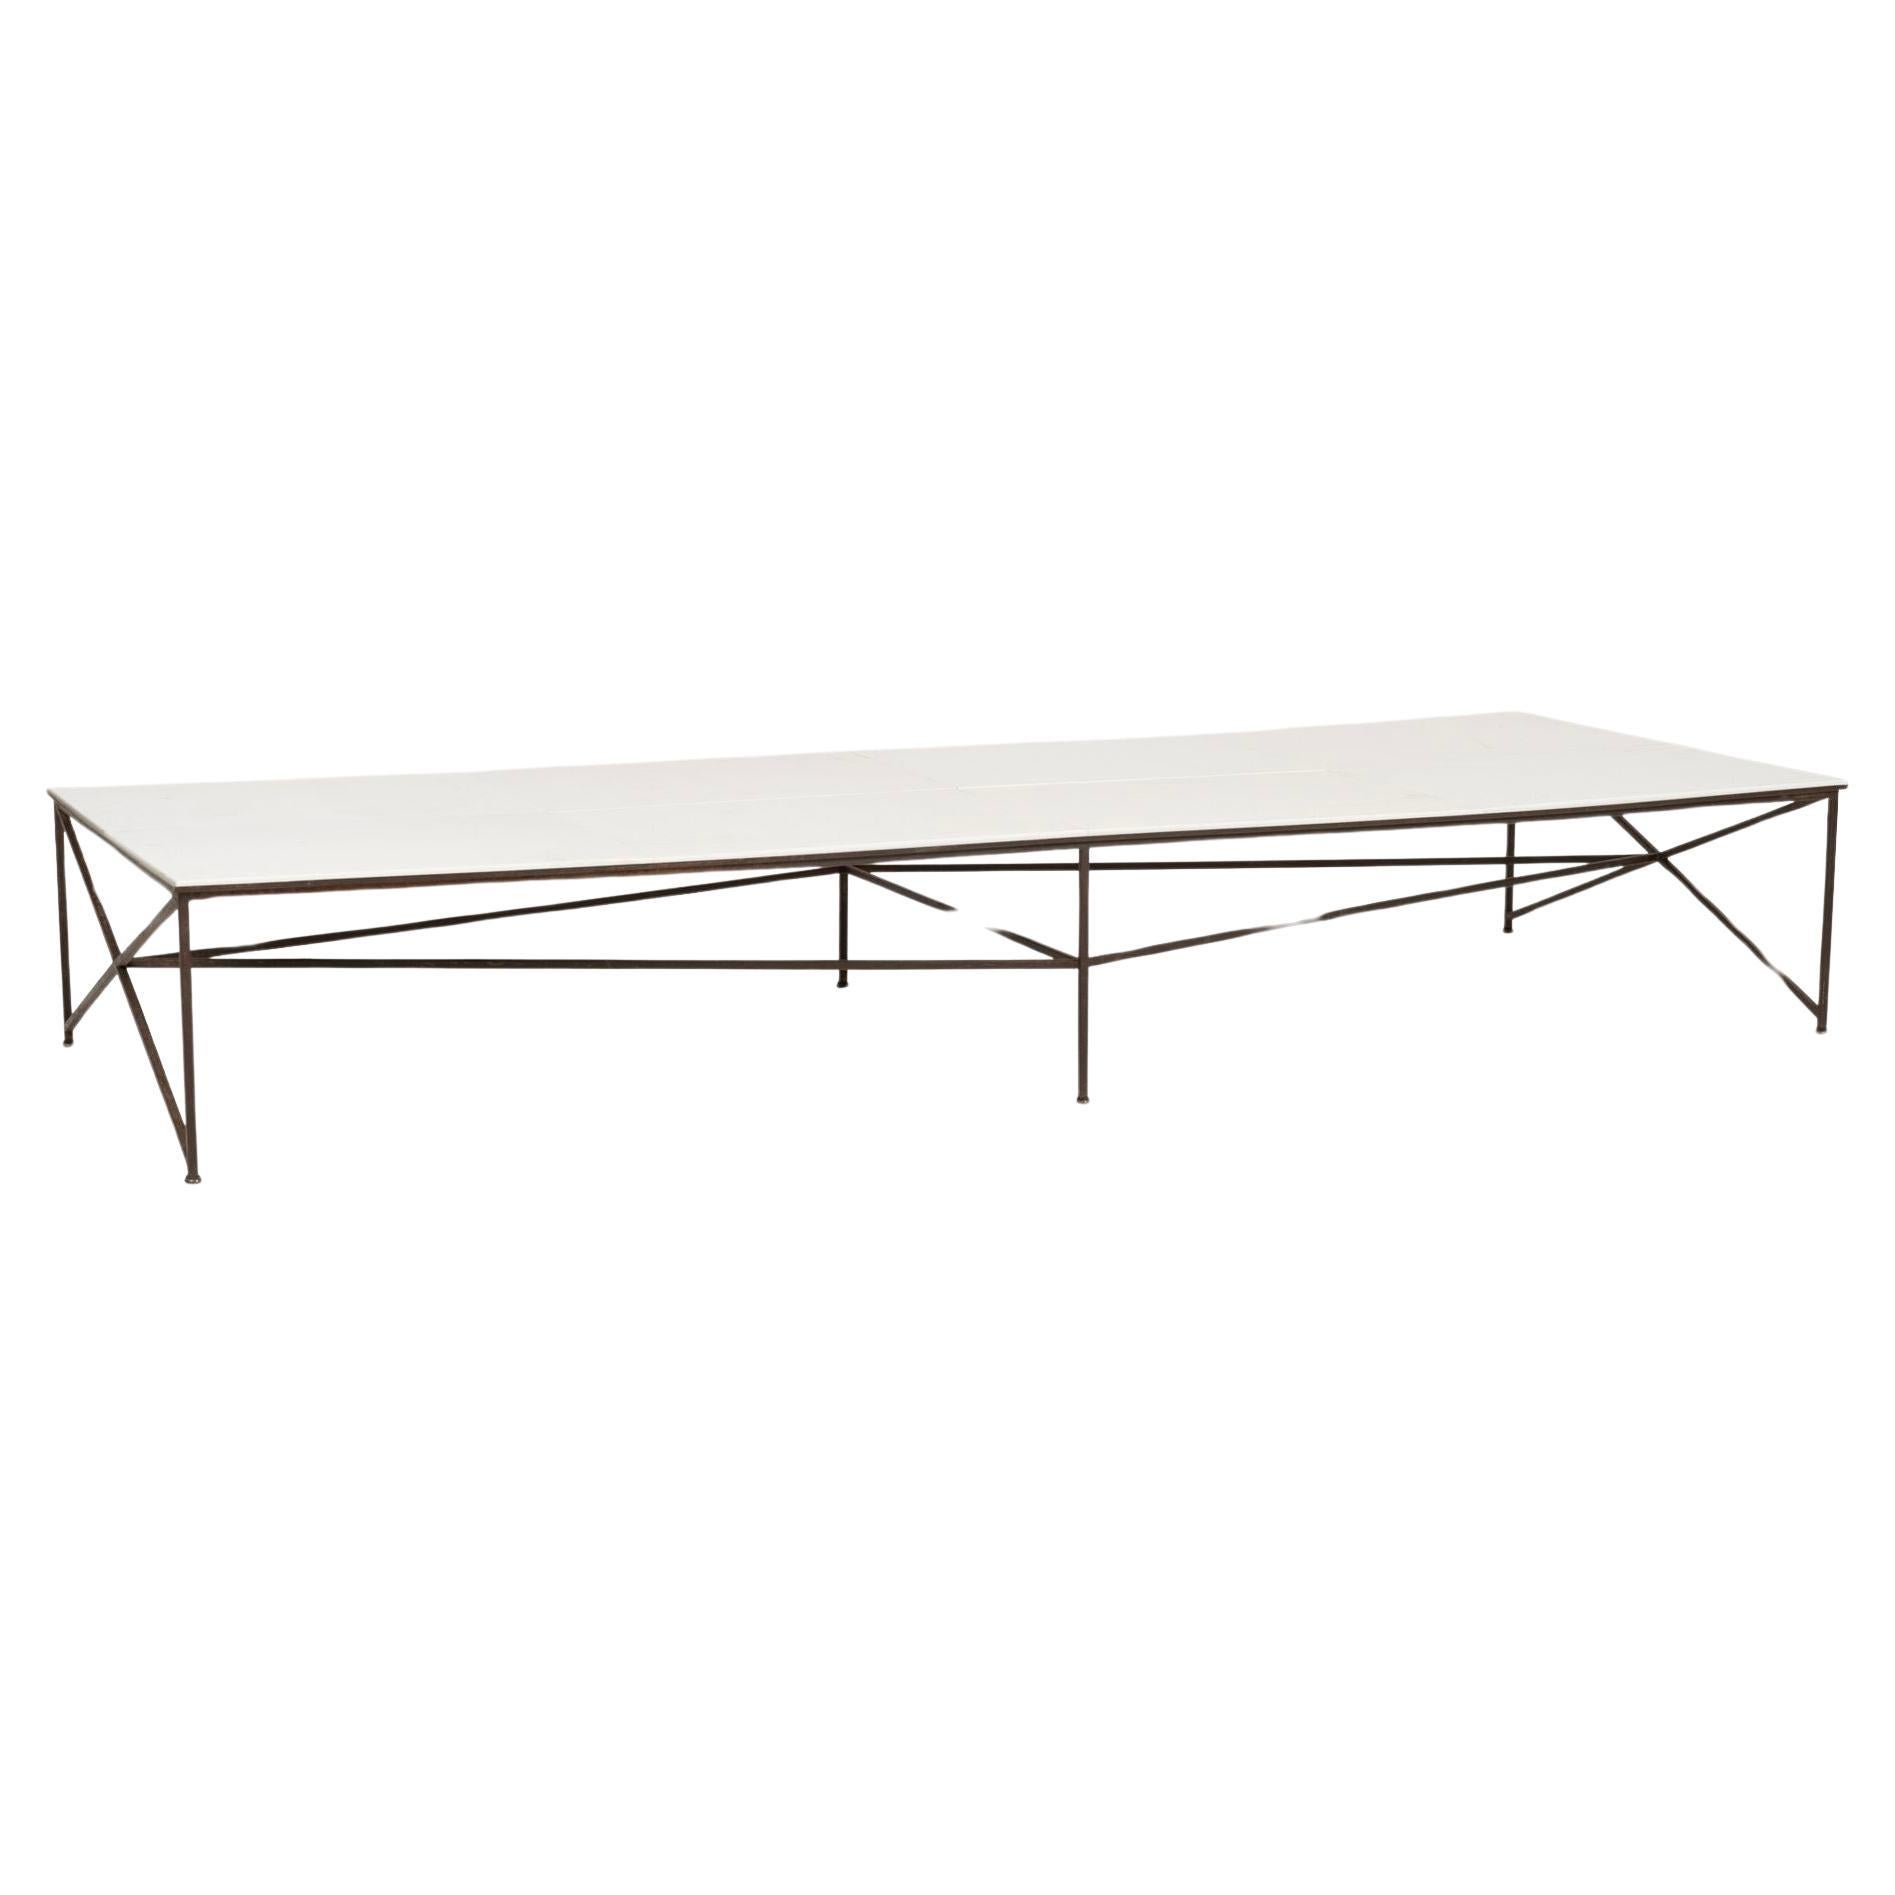 Paul McCobb Irwin Collection Monumental Display Table For Sale